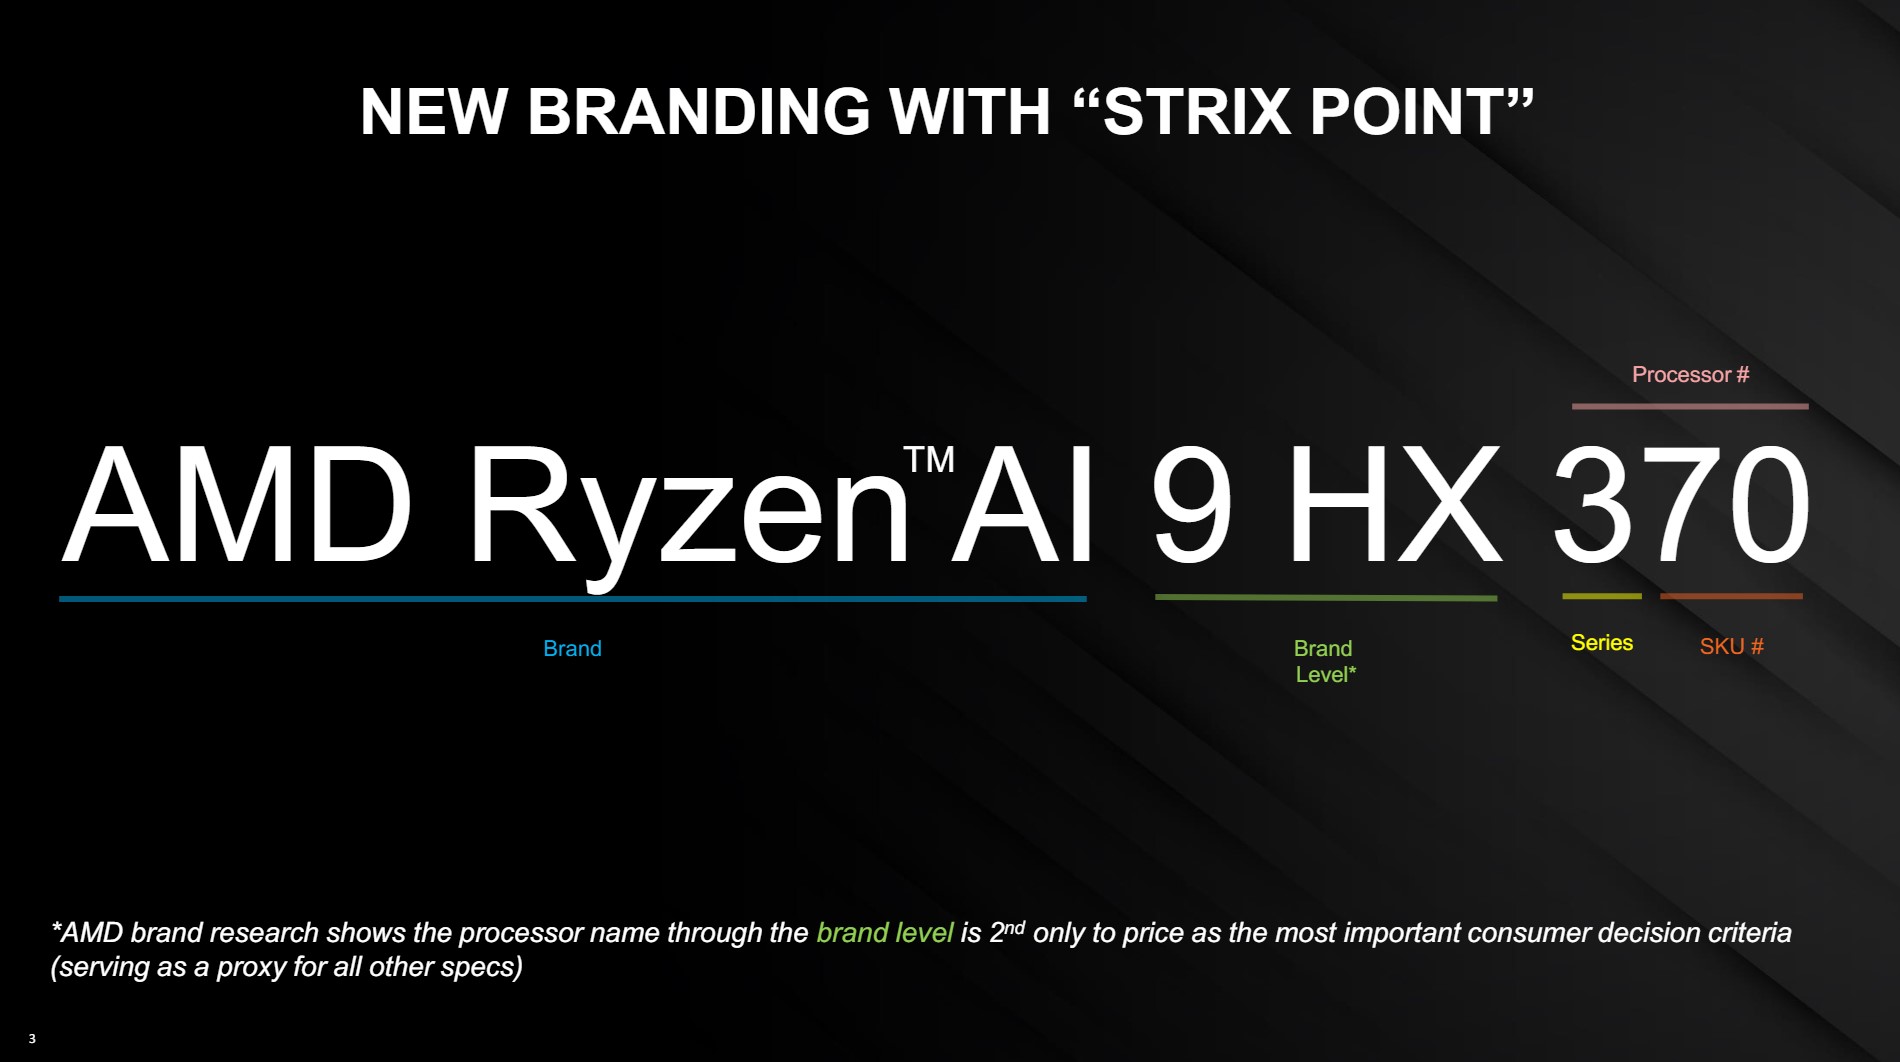 AMD's new naming convention for Strix Point CPUs.